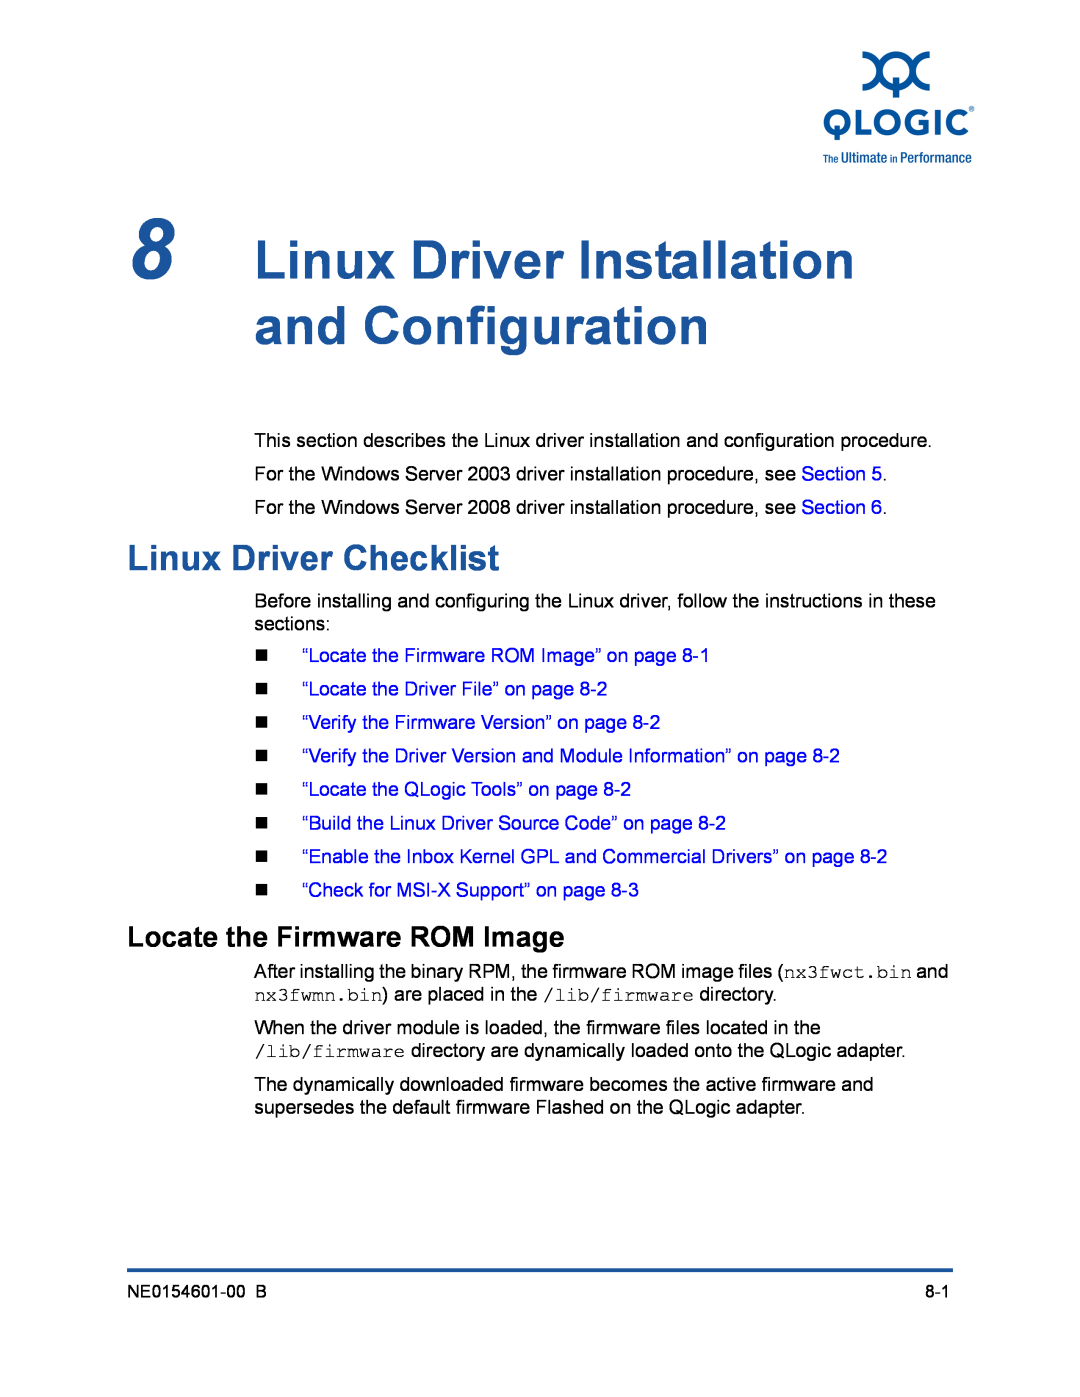 Q-Logic 3000, 3100 manual Linux Driver Installation and Configuration, Linux Driver Checklist, Locate the Firmware ROM Image 